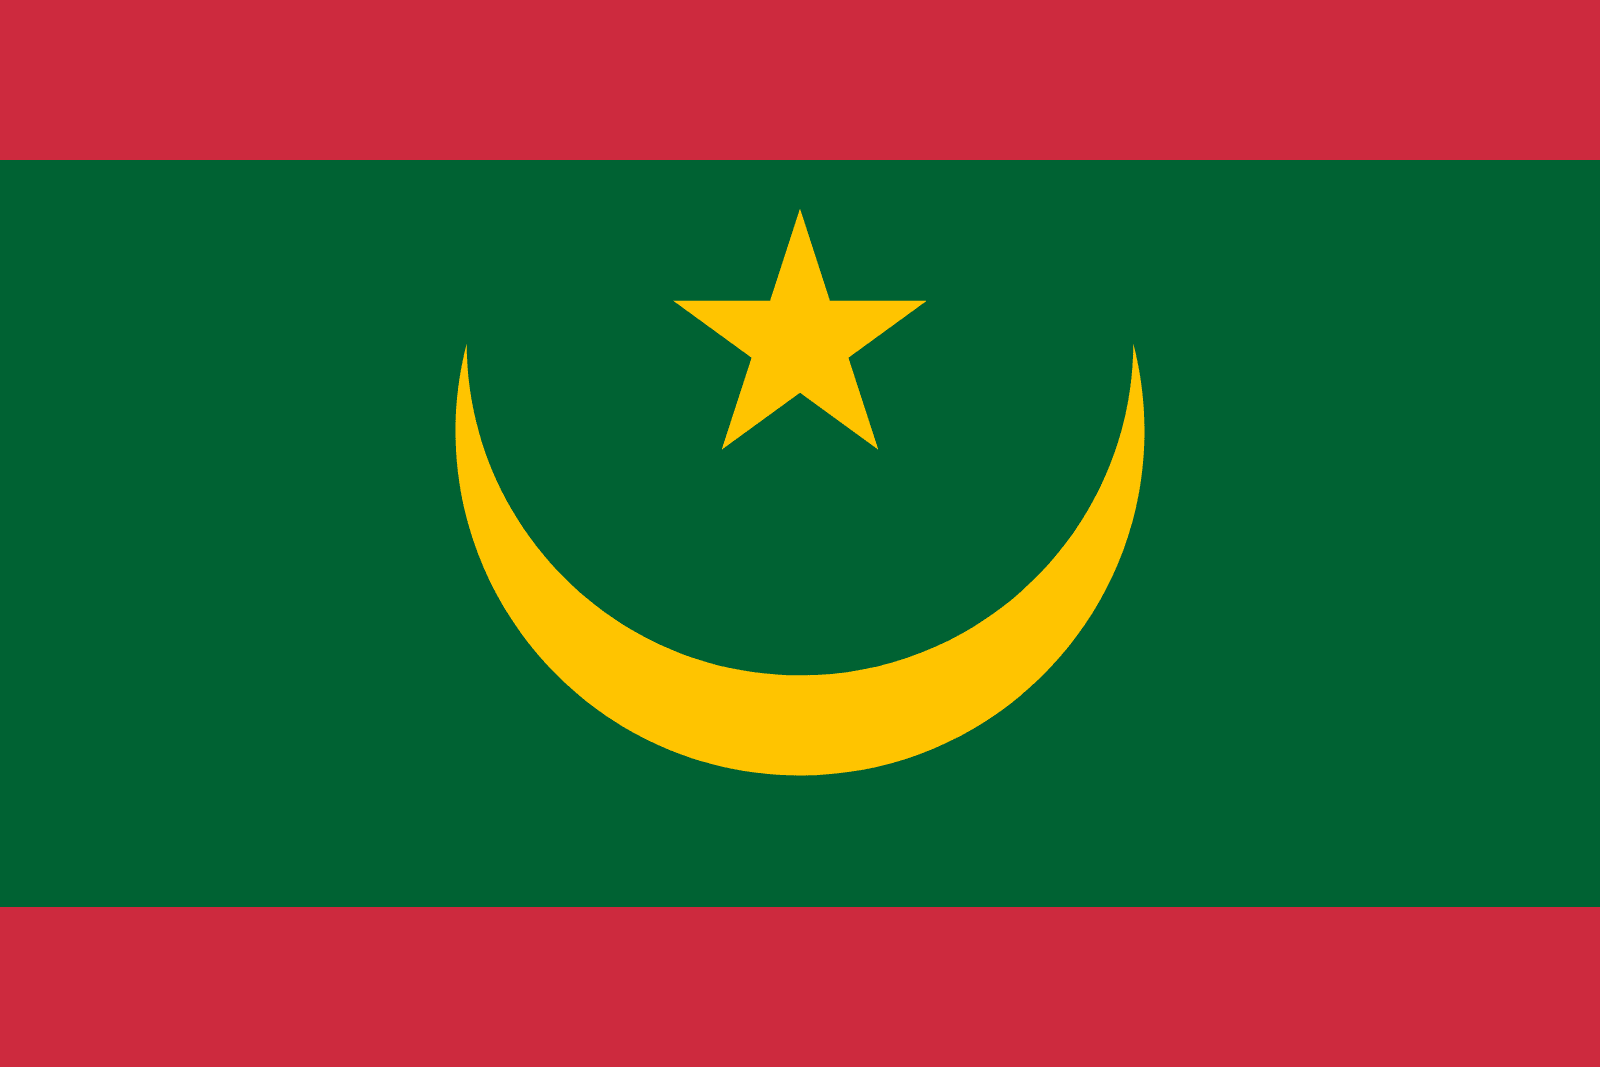 why do flags of islamic countries have the same colors and what does the crescent moon and star symbolize